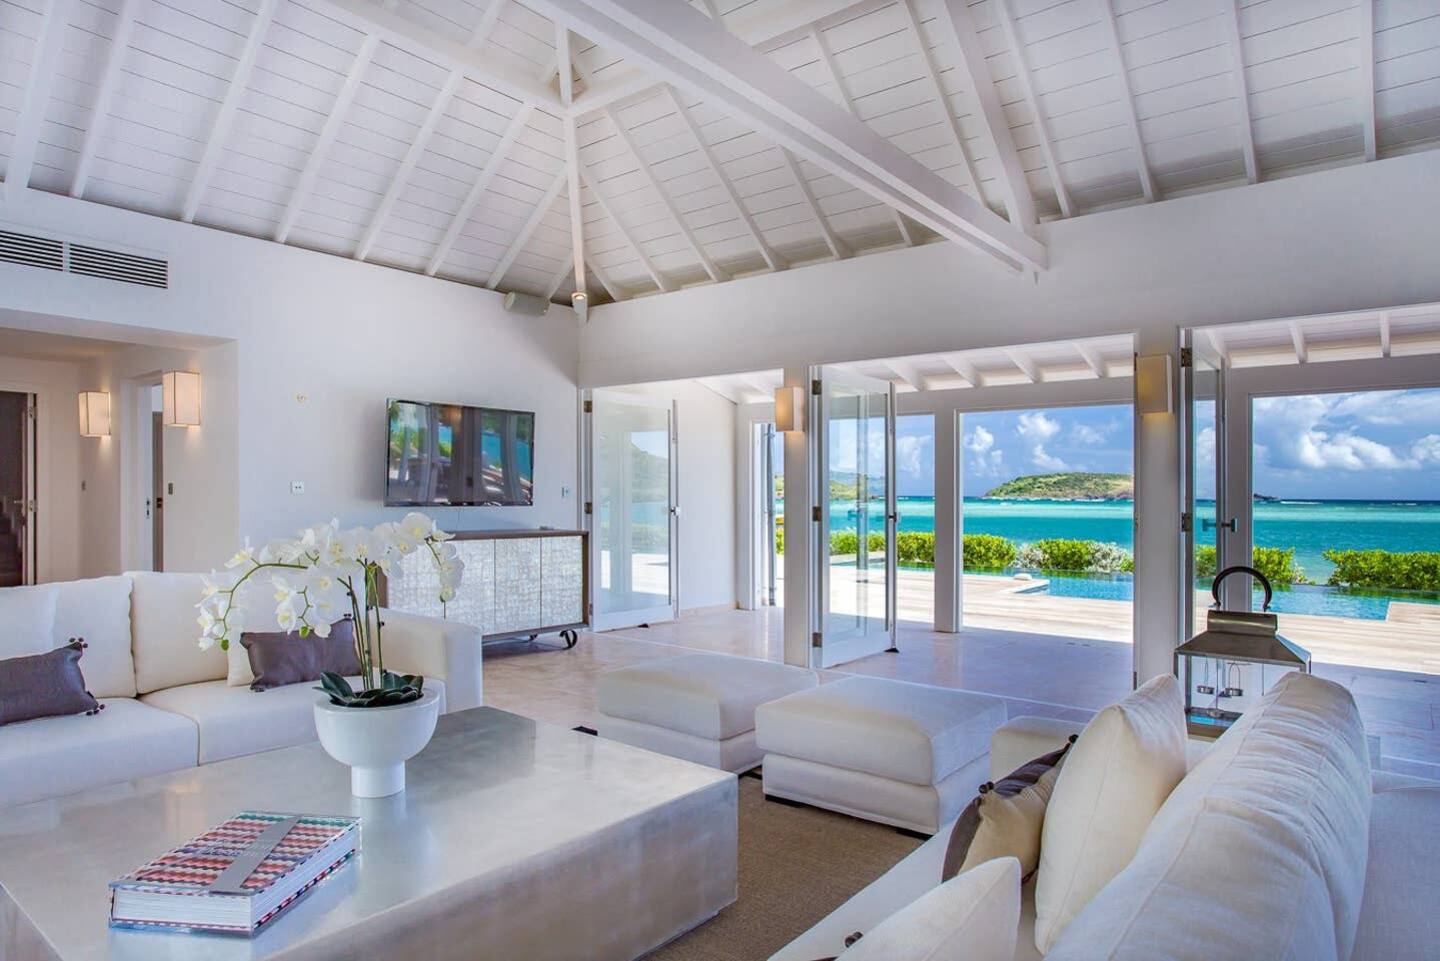 A spacious living area with floor-to-ceiling windows offering breathtaking views of the beach, furnished with comfortable seating and stylish decor.